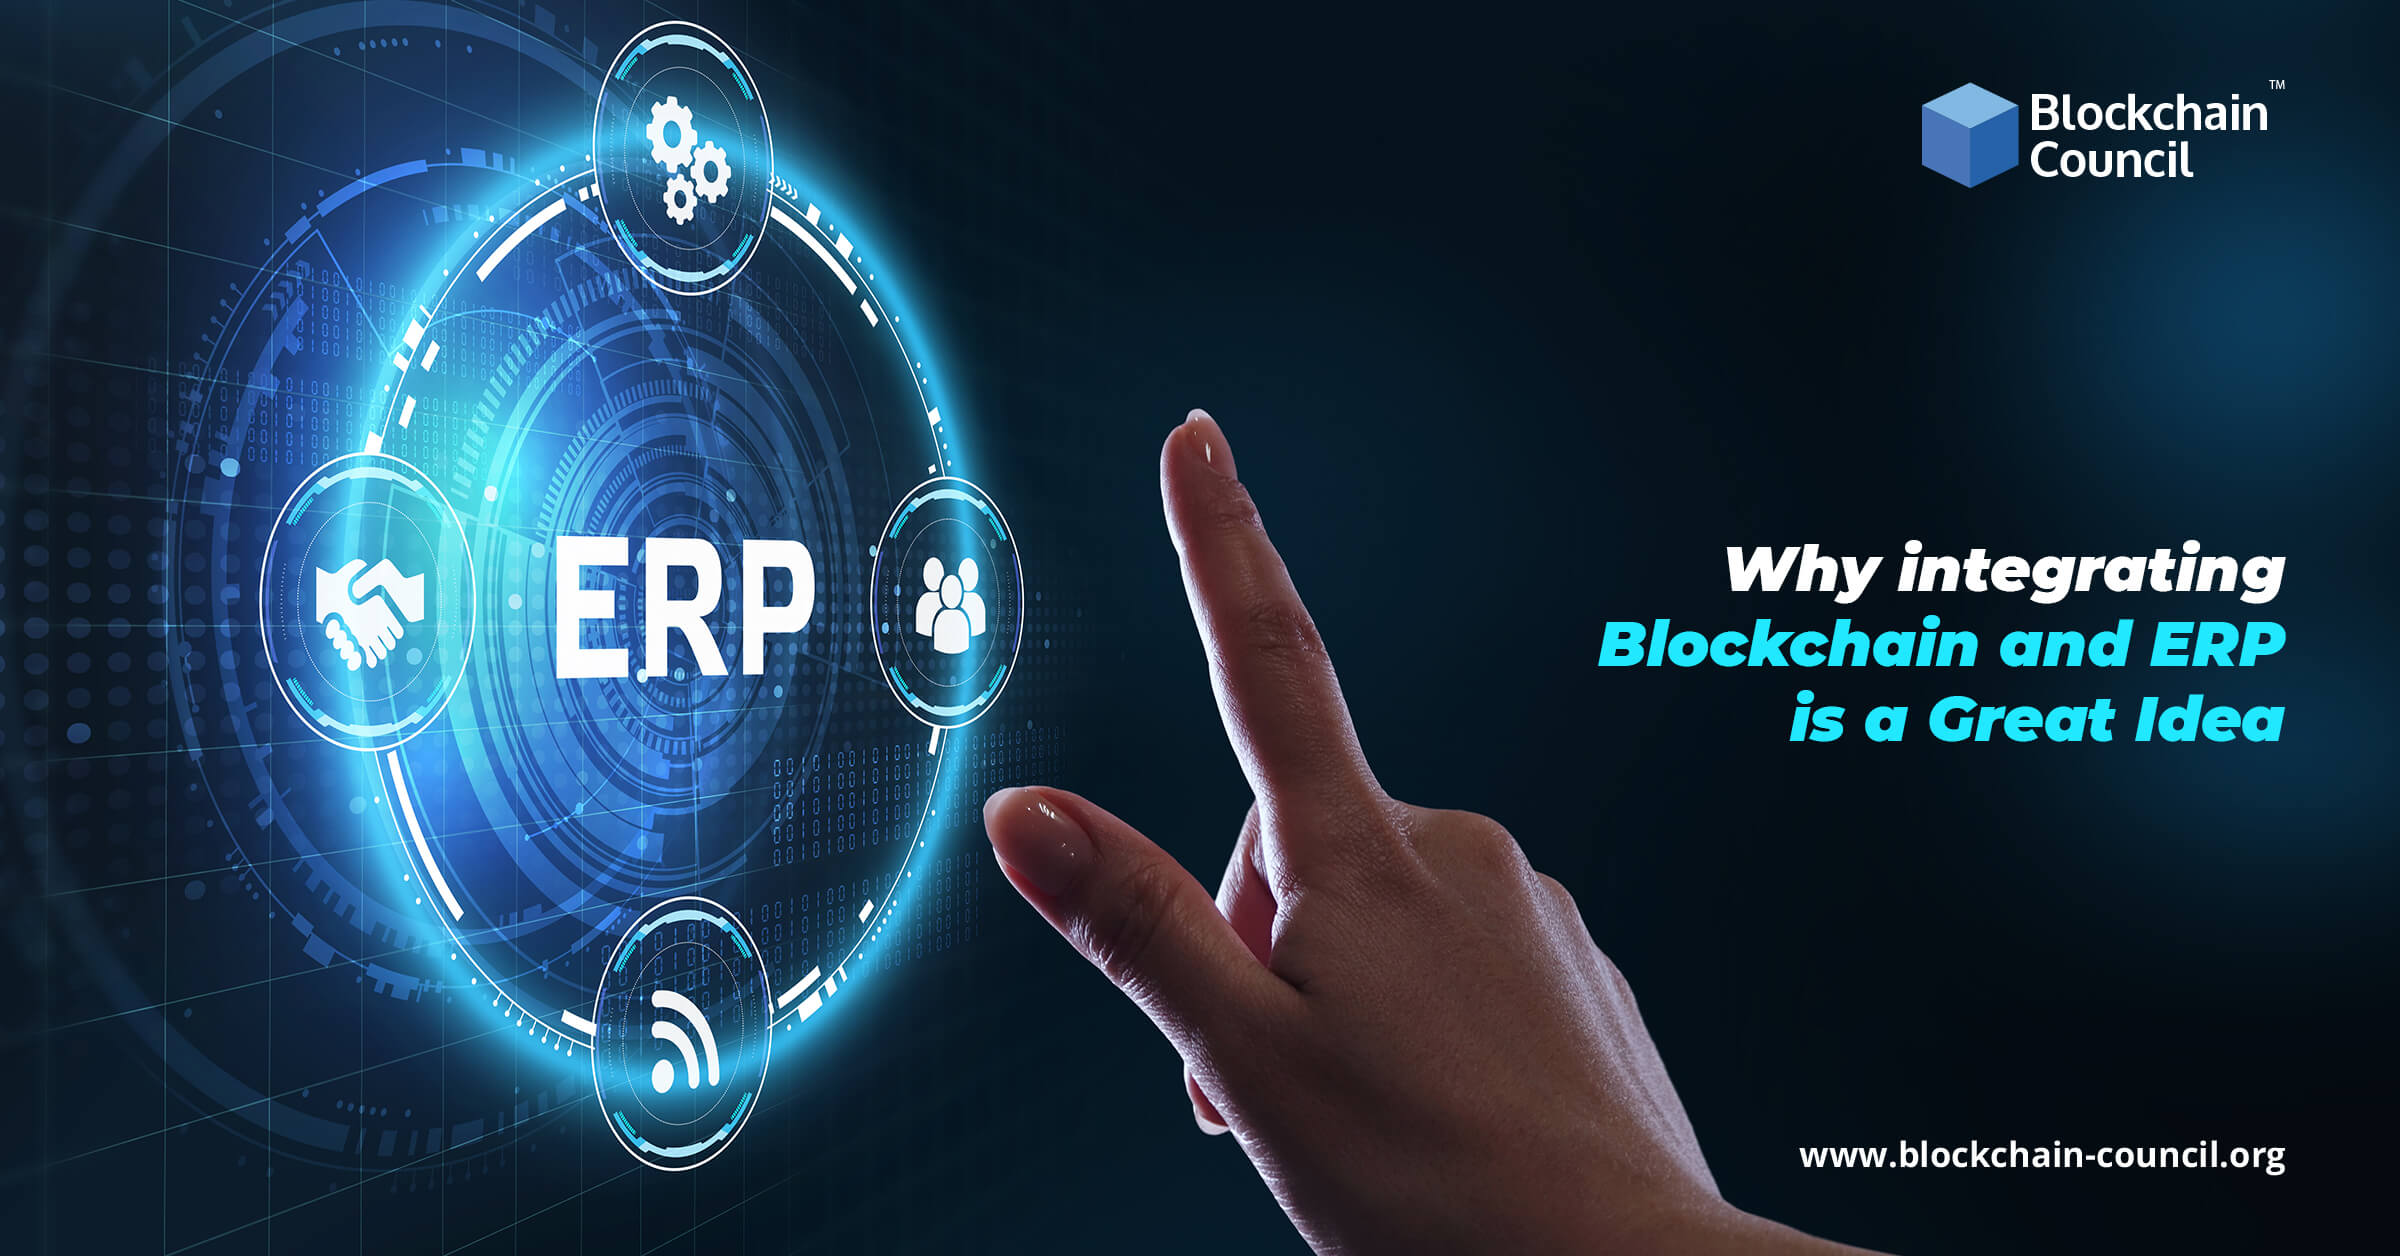 Why integrating Blockchain and ERP is a Great Idea